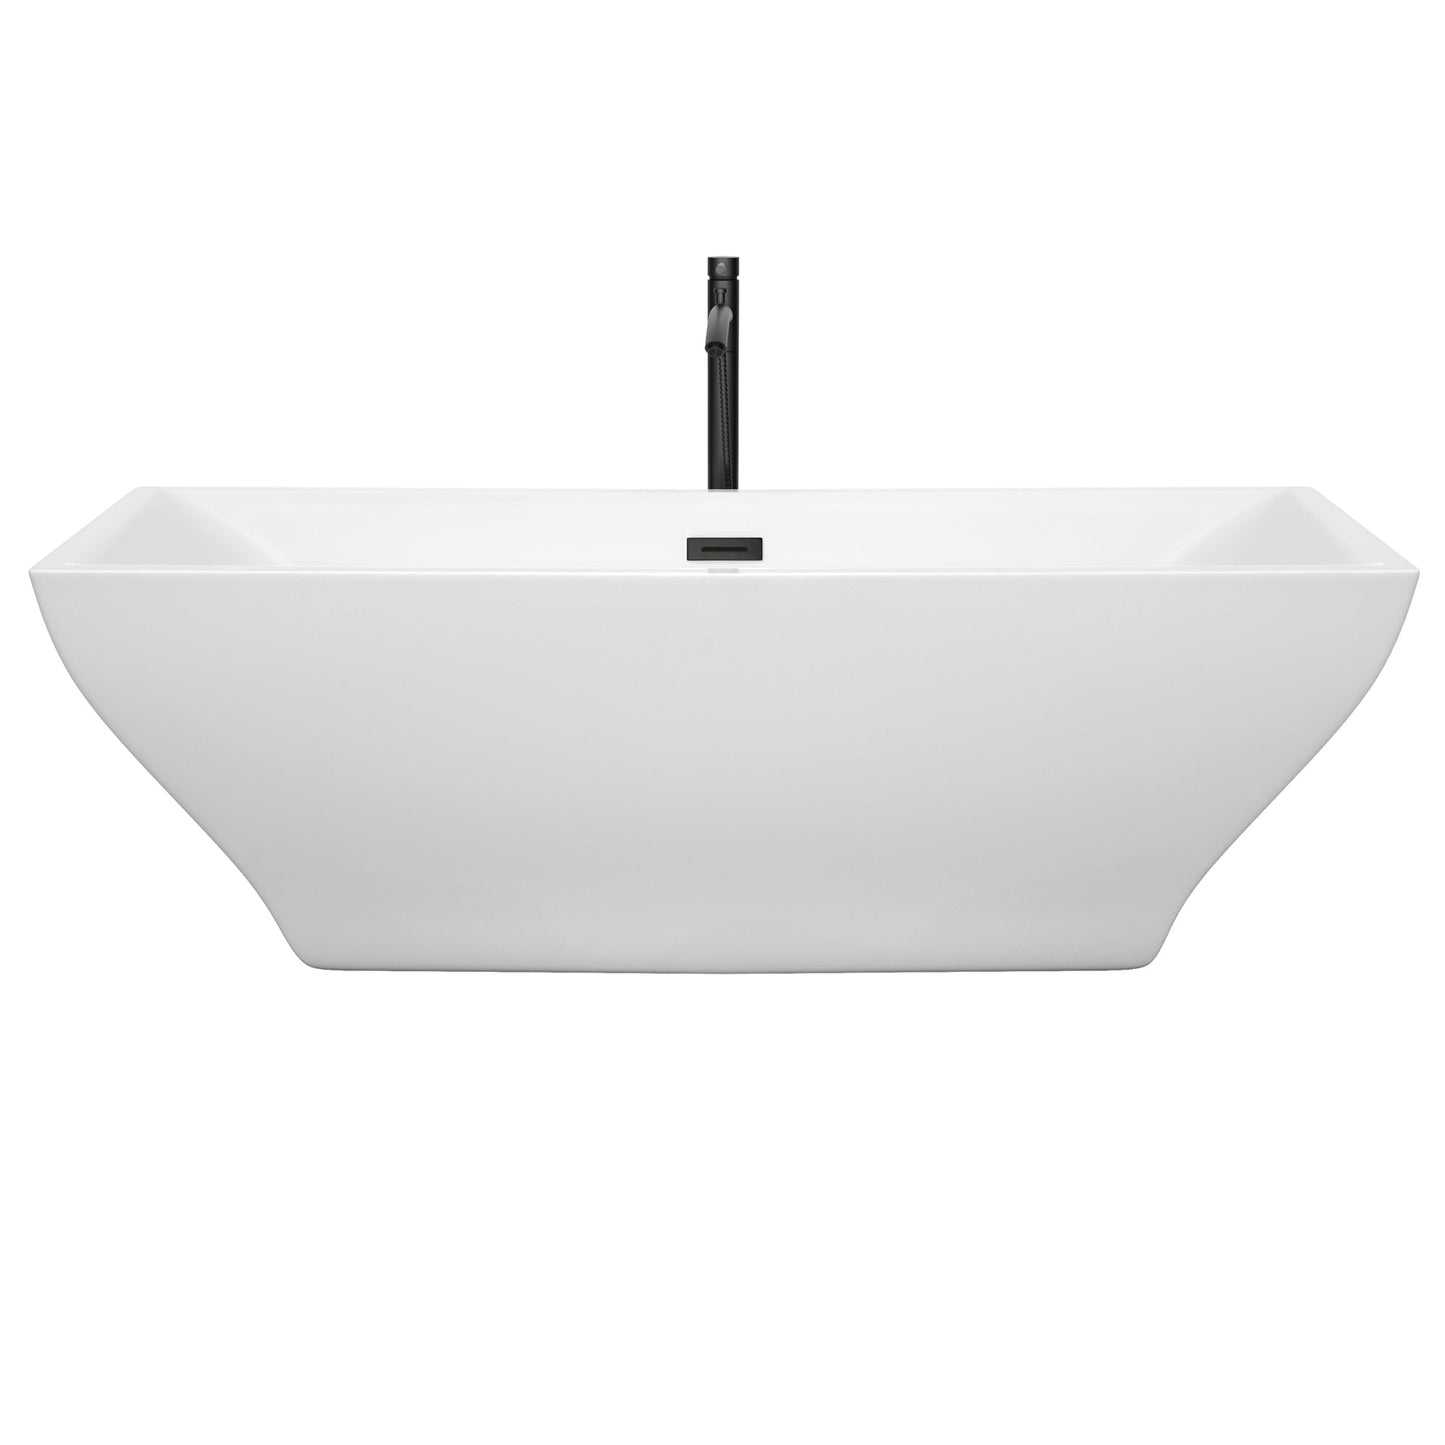 Wyndham Collection Maryam 71" Freestanding Bathtub in White With Floor Mounted Faucet, Drain and Overflow Trim in Matte Black